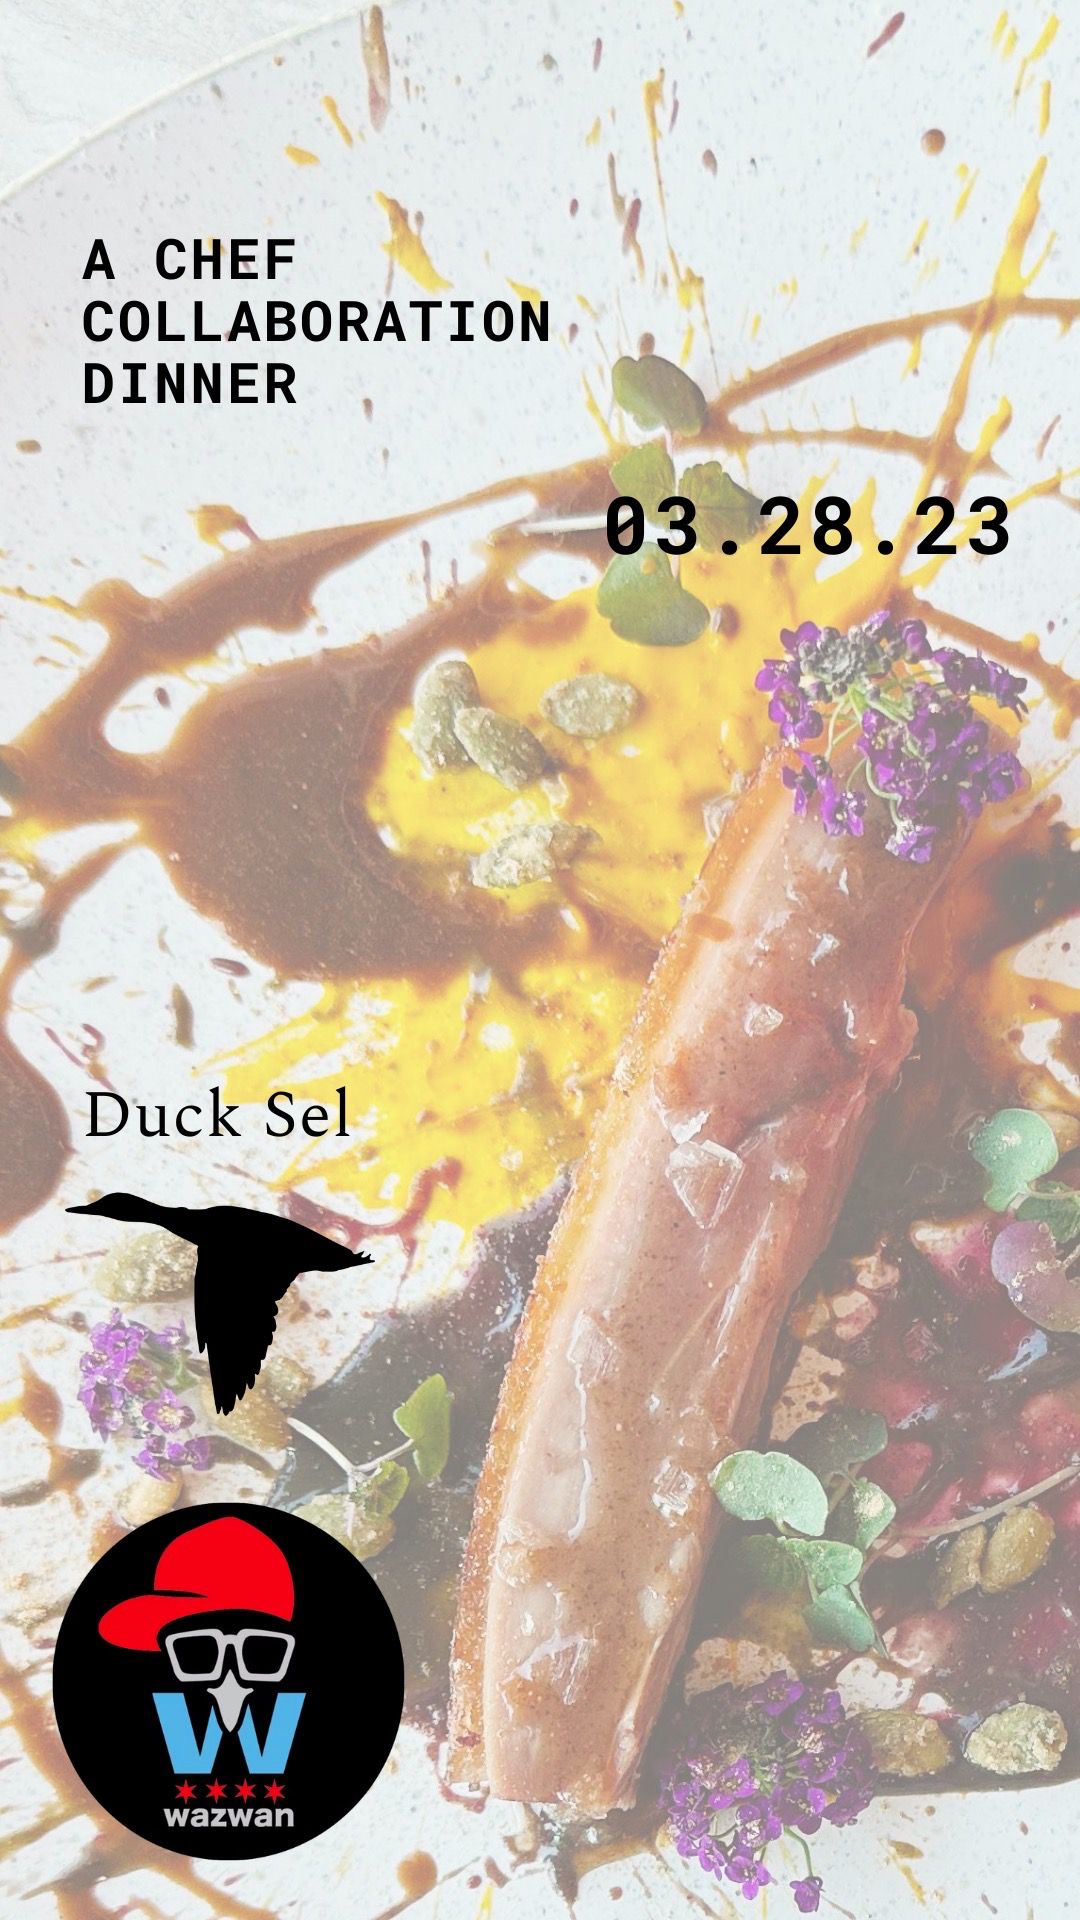 A flier with a duck dish.